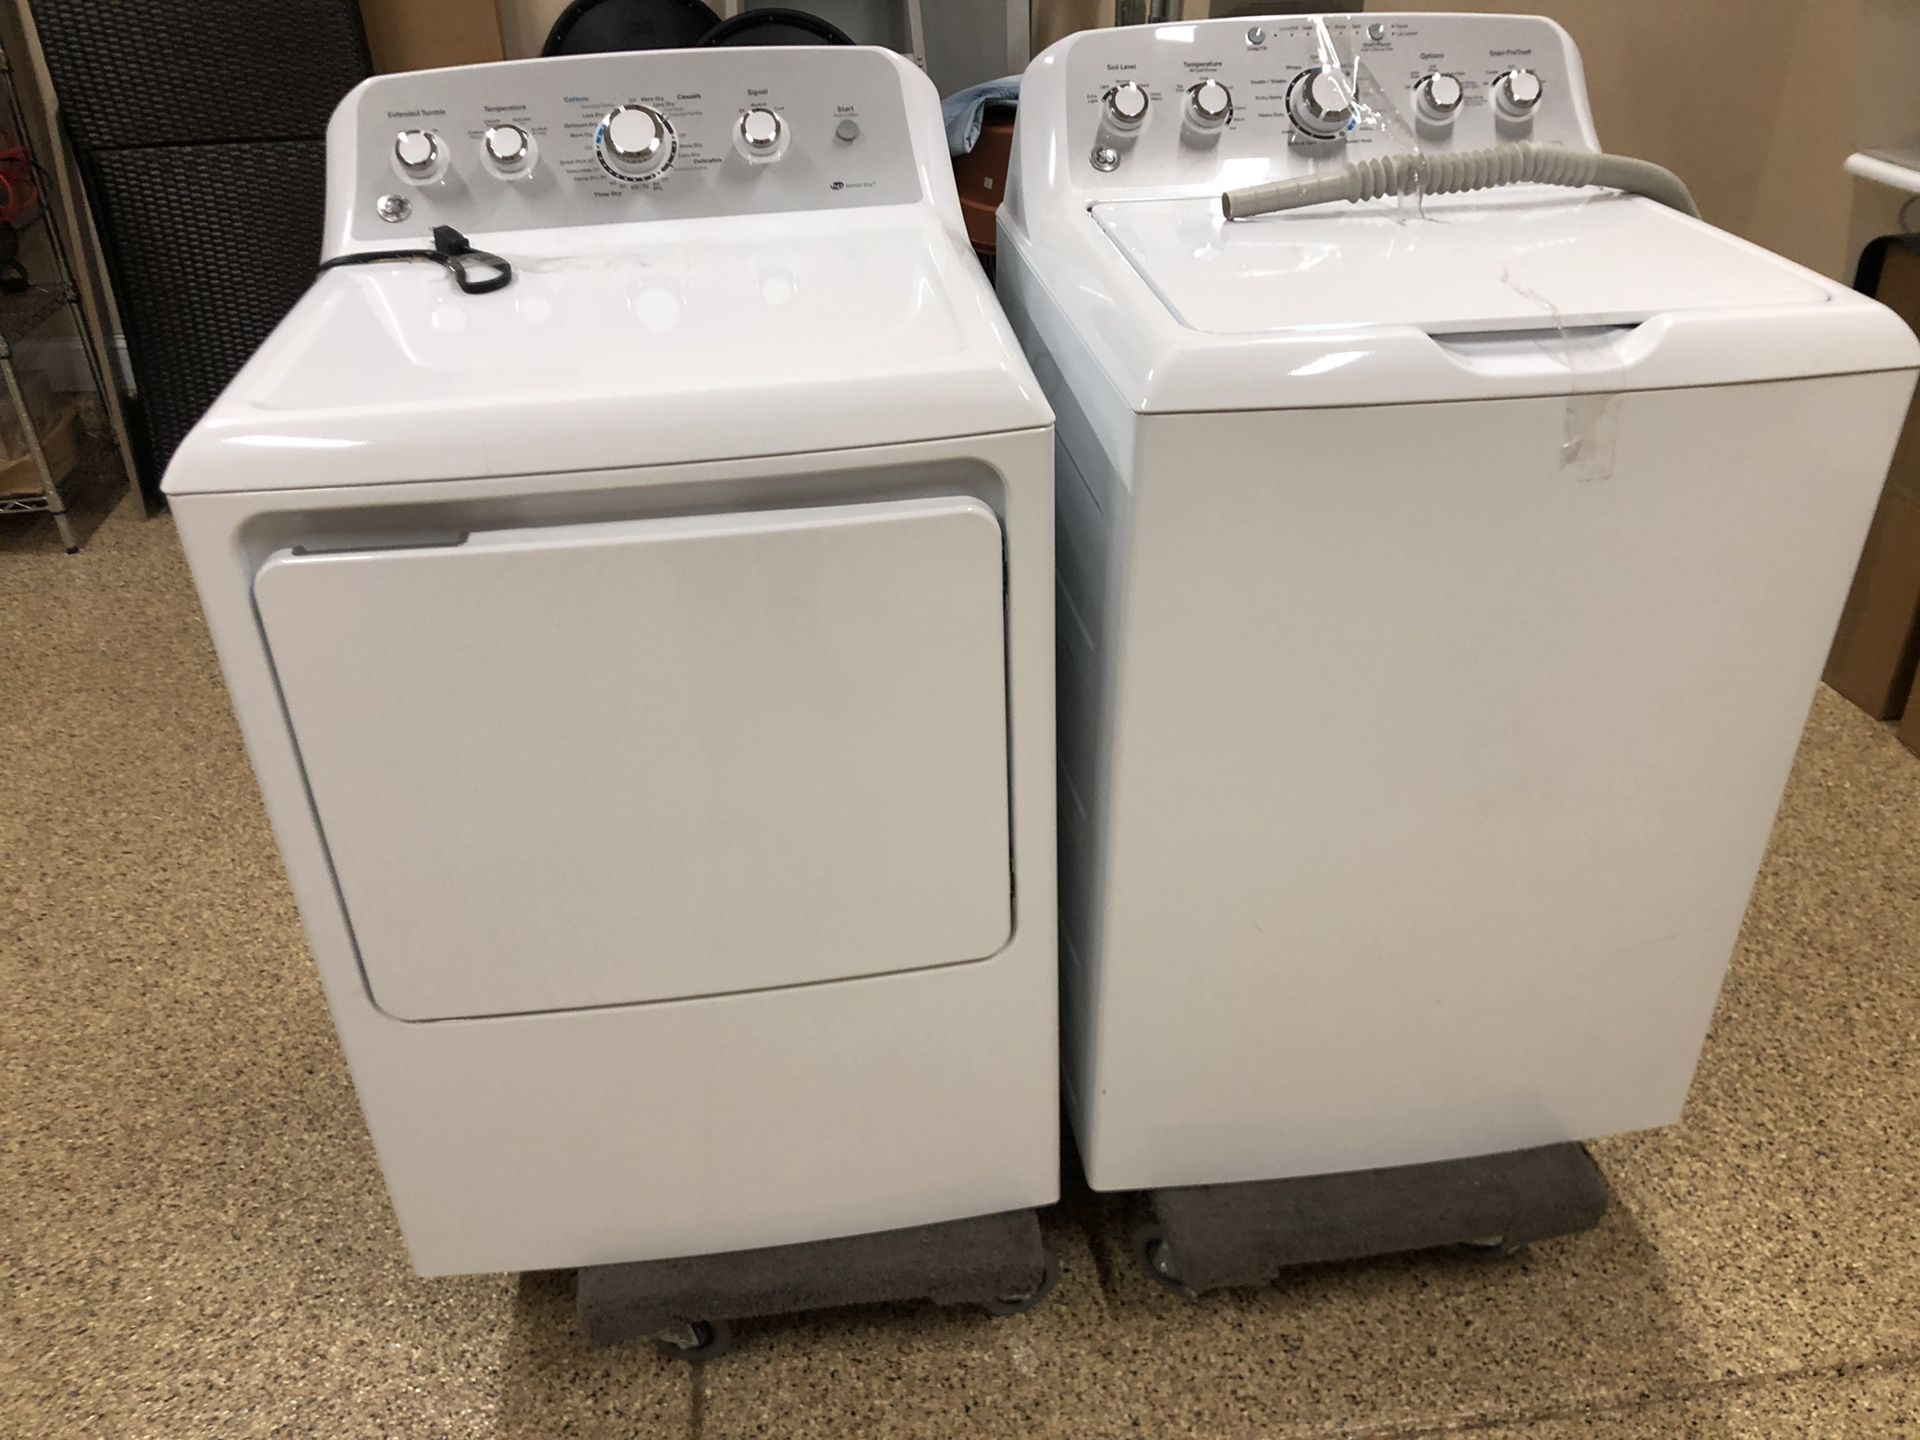 GE washer 4.4 GE gas dryer 7.4. Brand new never used. I’m asked 600.00